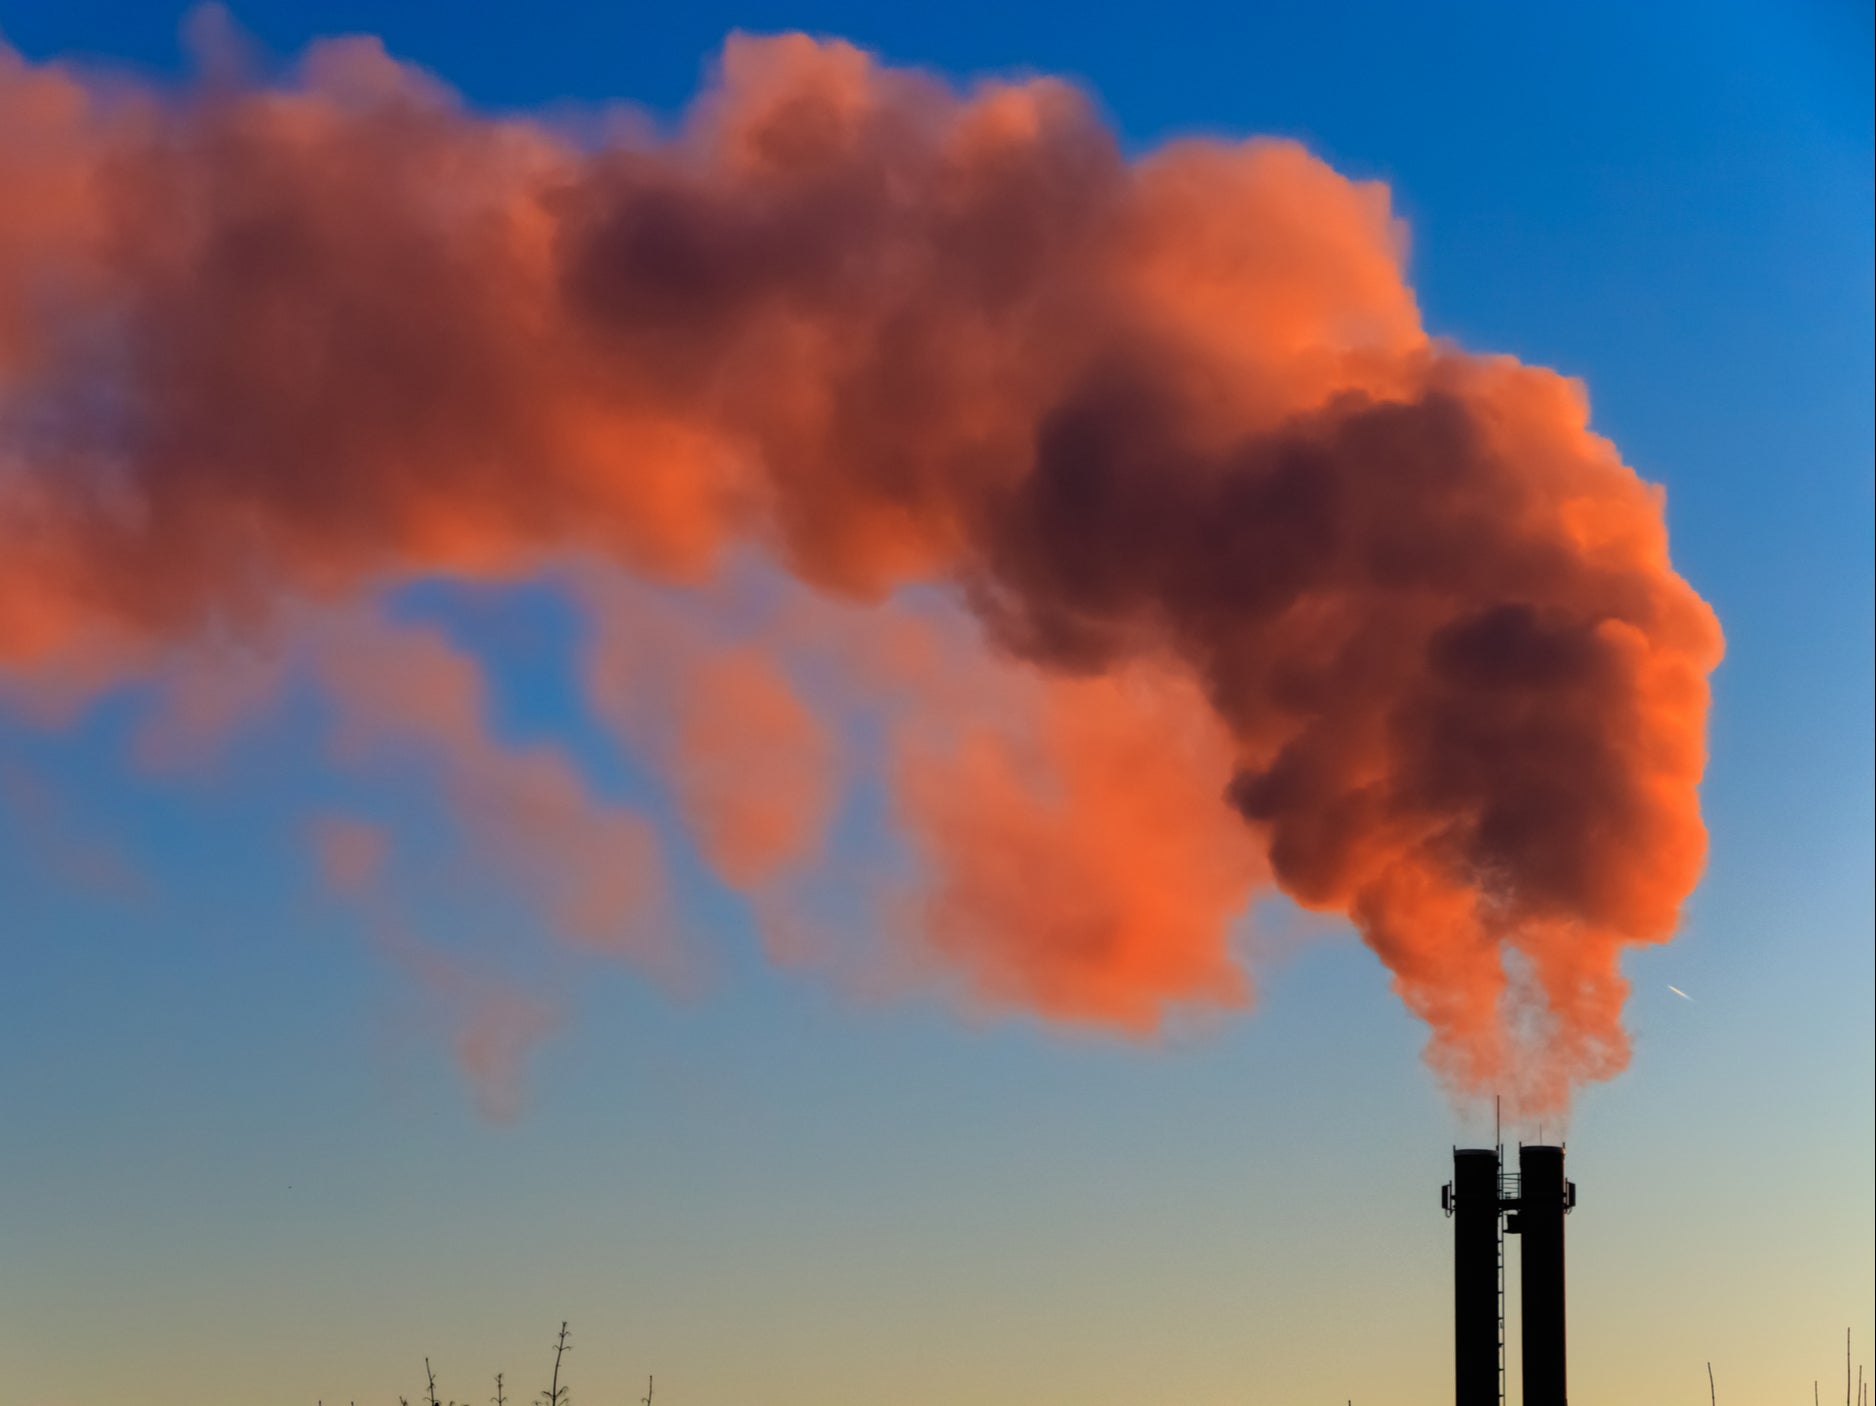 World carbon budget 'significantly smaller' than previous estimates, new research suggests